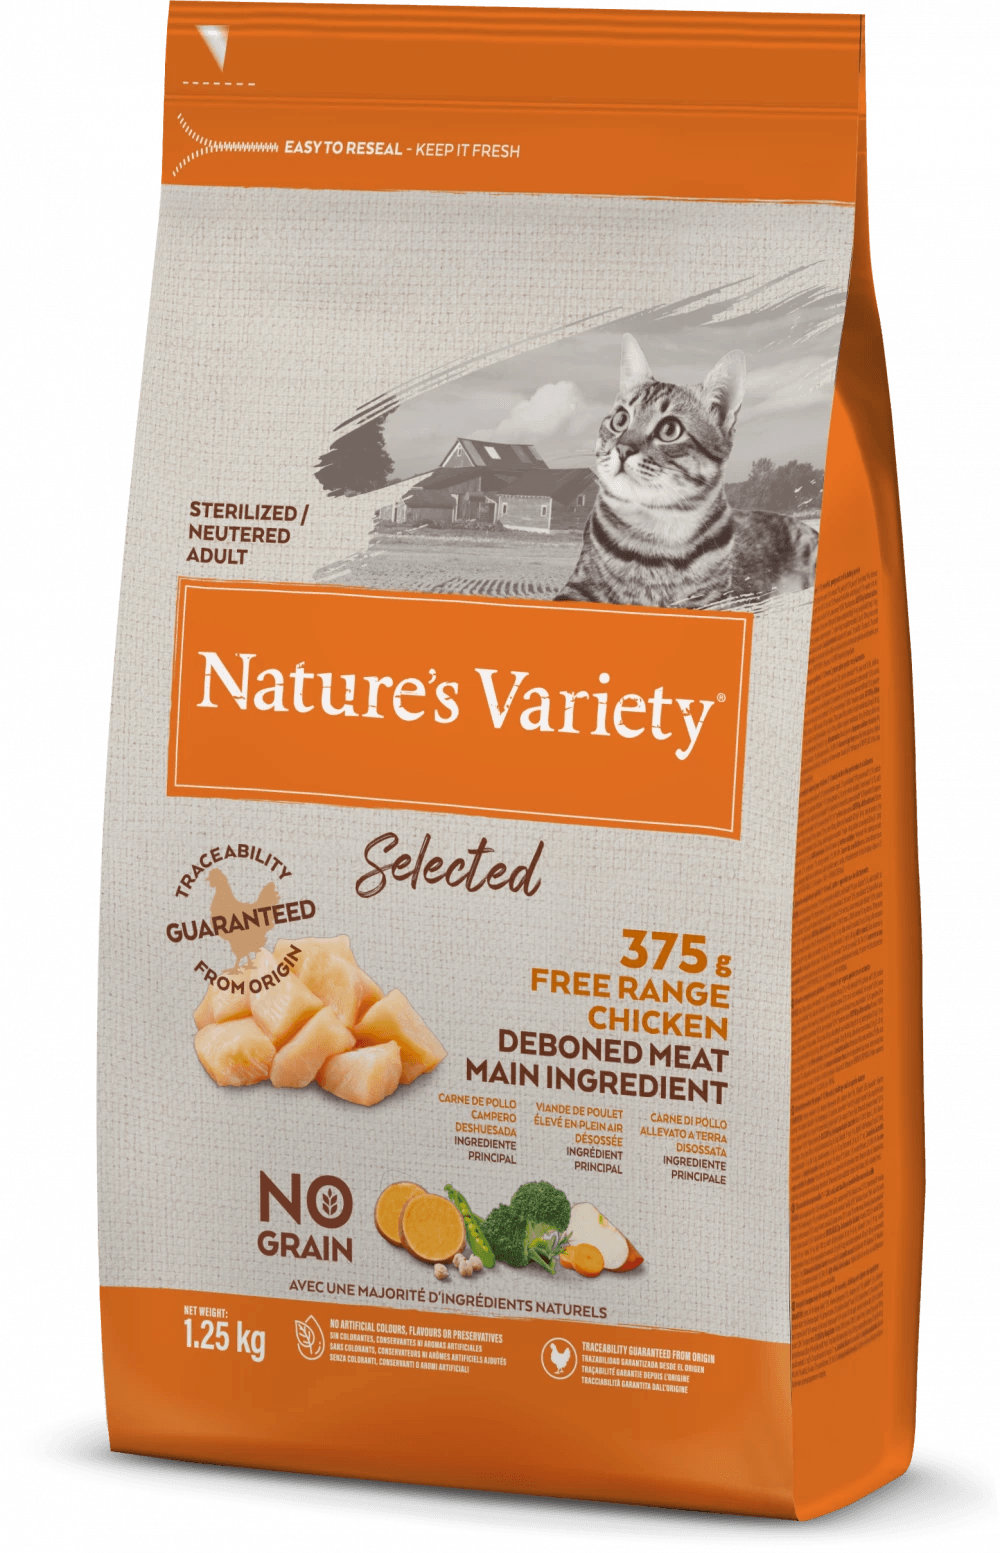 Nature's Variety - SELECTED DRY FREE RANGE CHICKEN FOR ADULT CATS 1.25kg - North East Pet Shop Nature's Variety